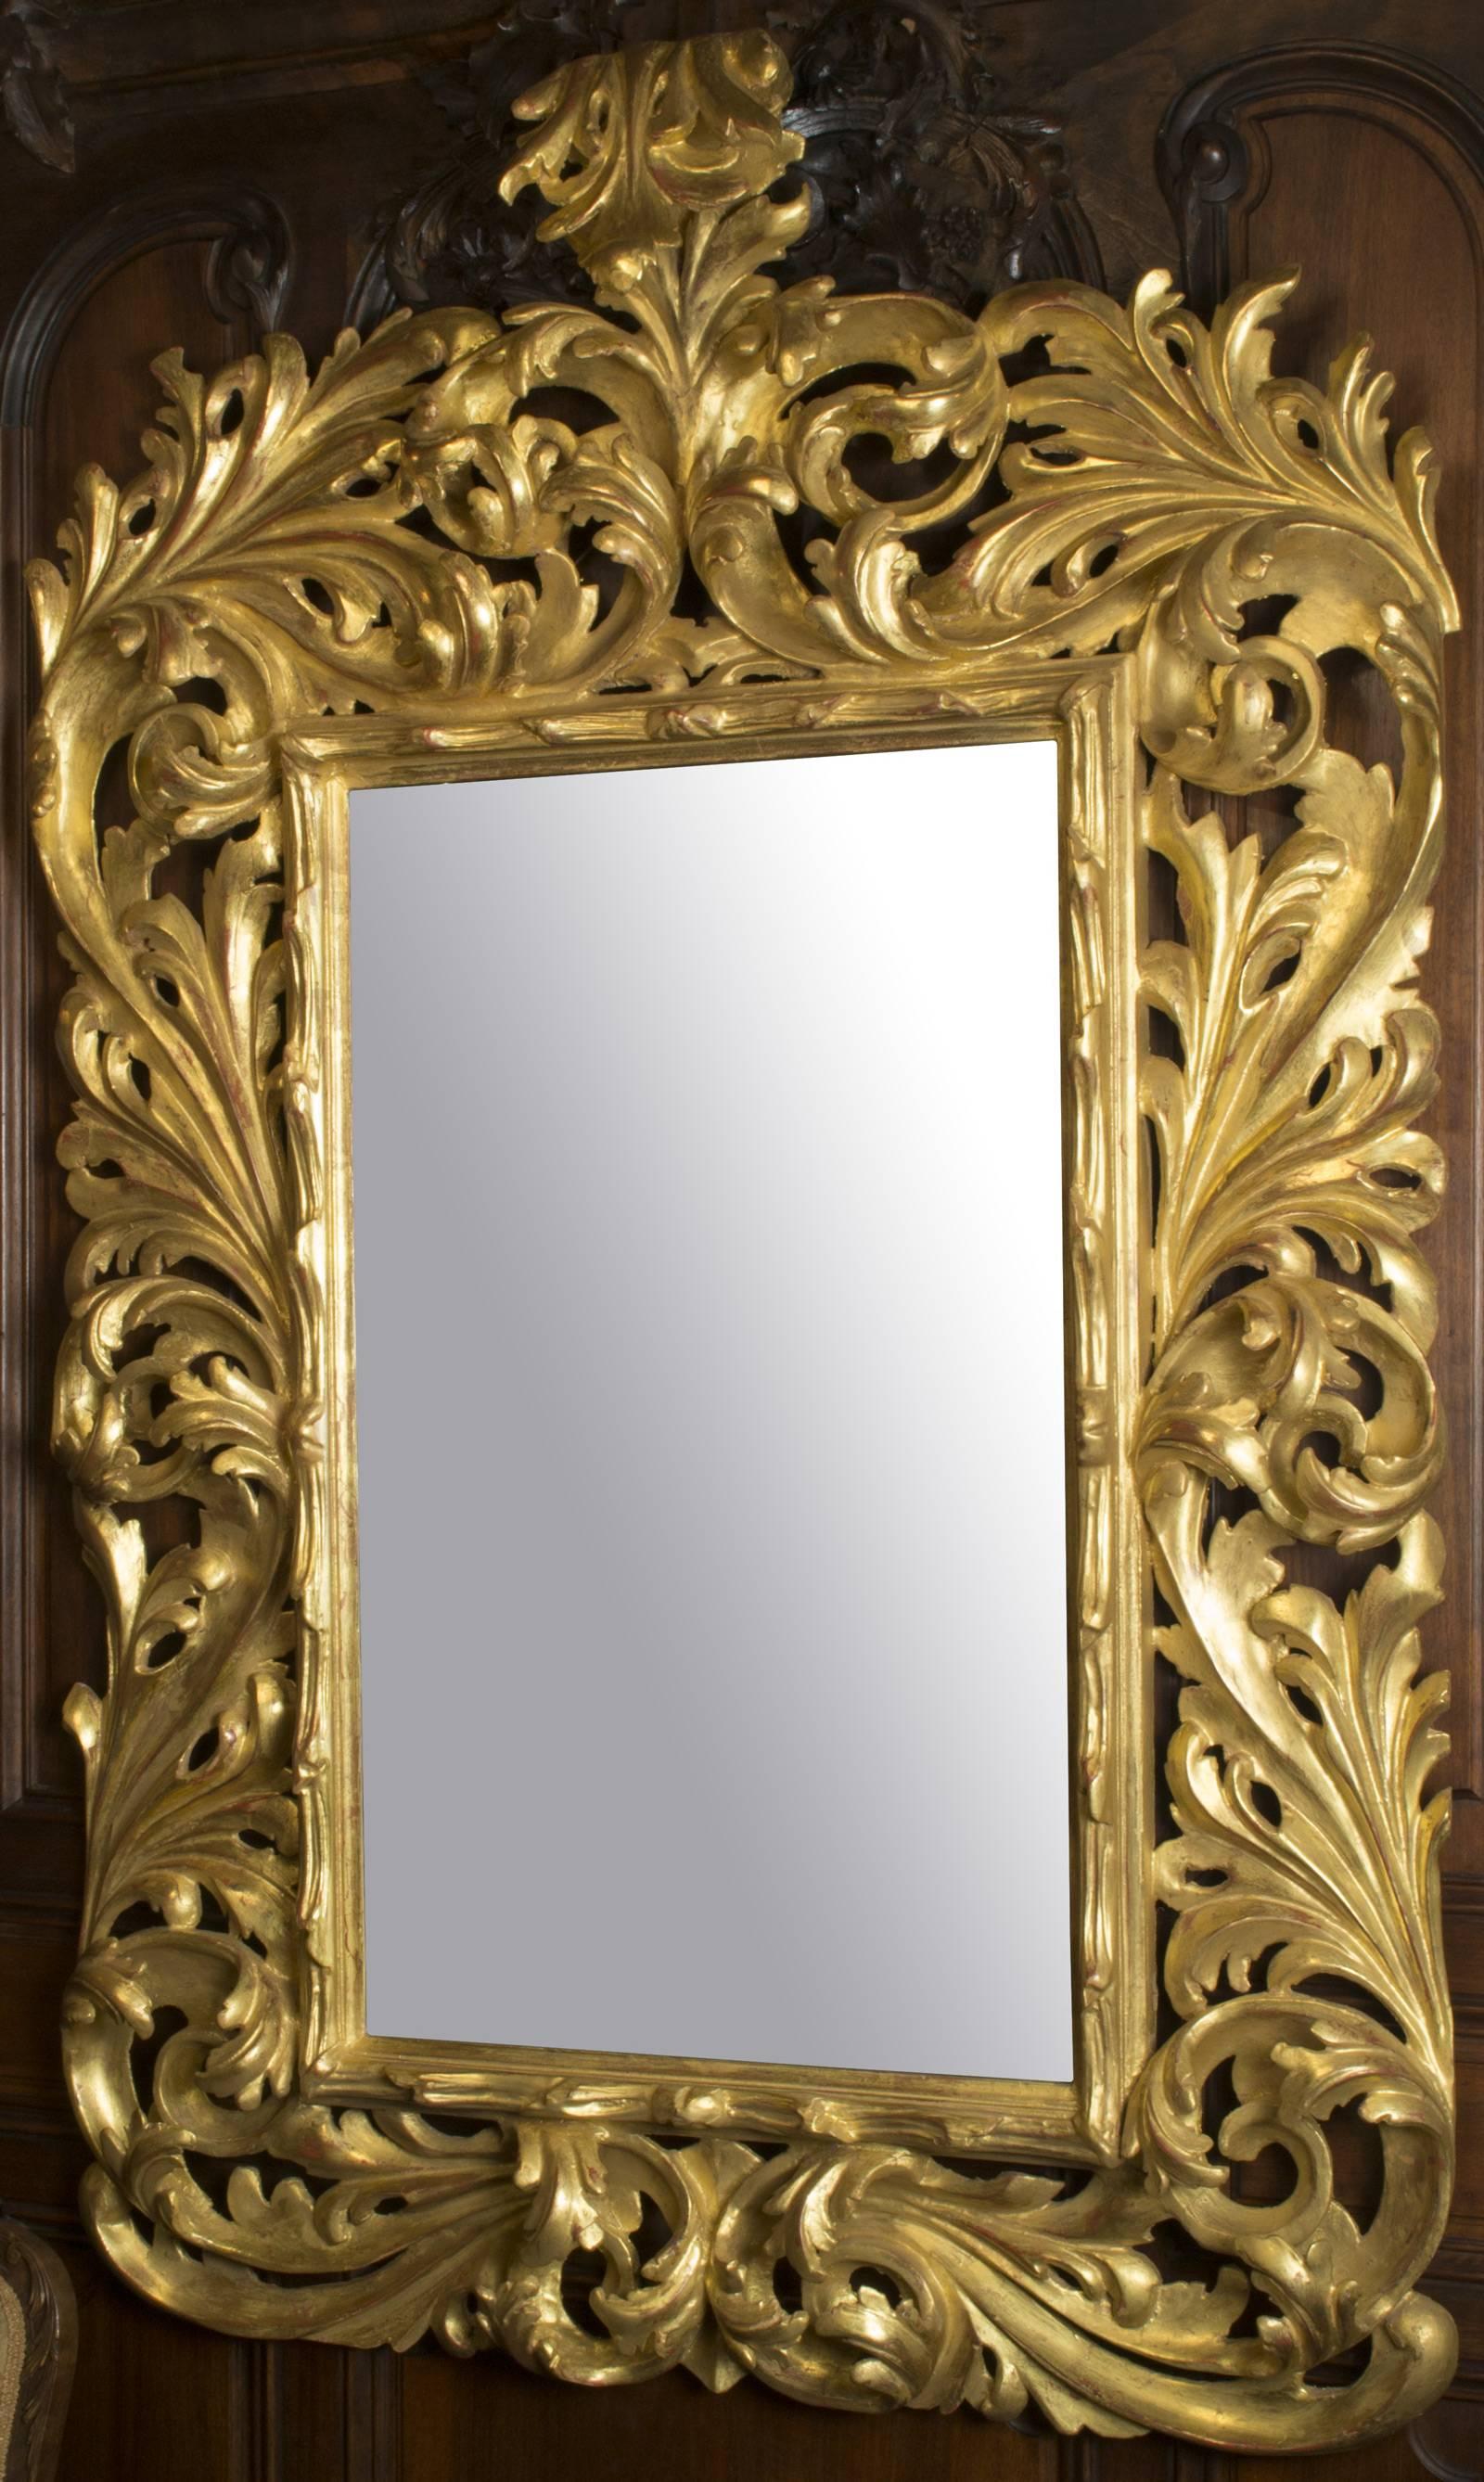 Made in Venice in the mid-nineteenth century, this large mirror is made of carved — not moulded — wood and generously gilt.